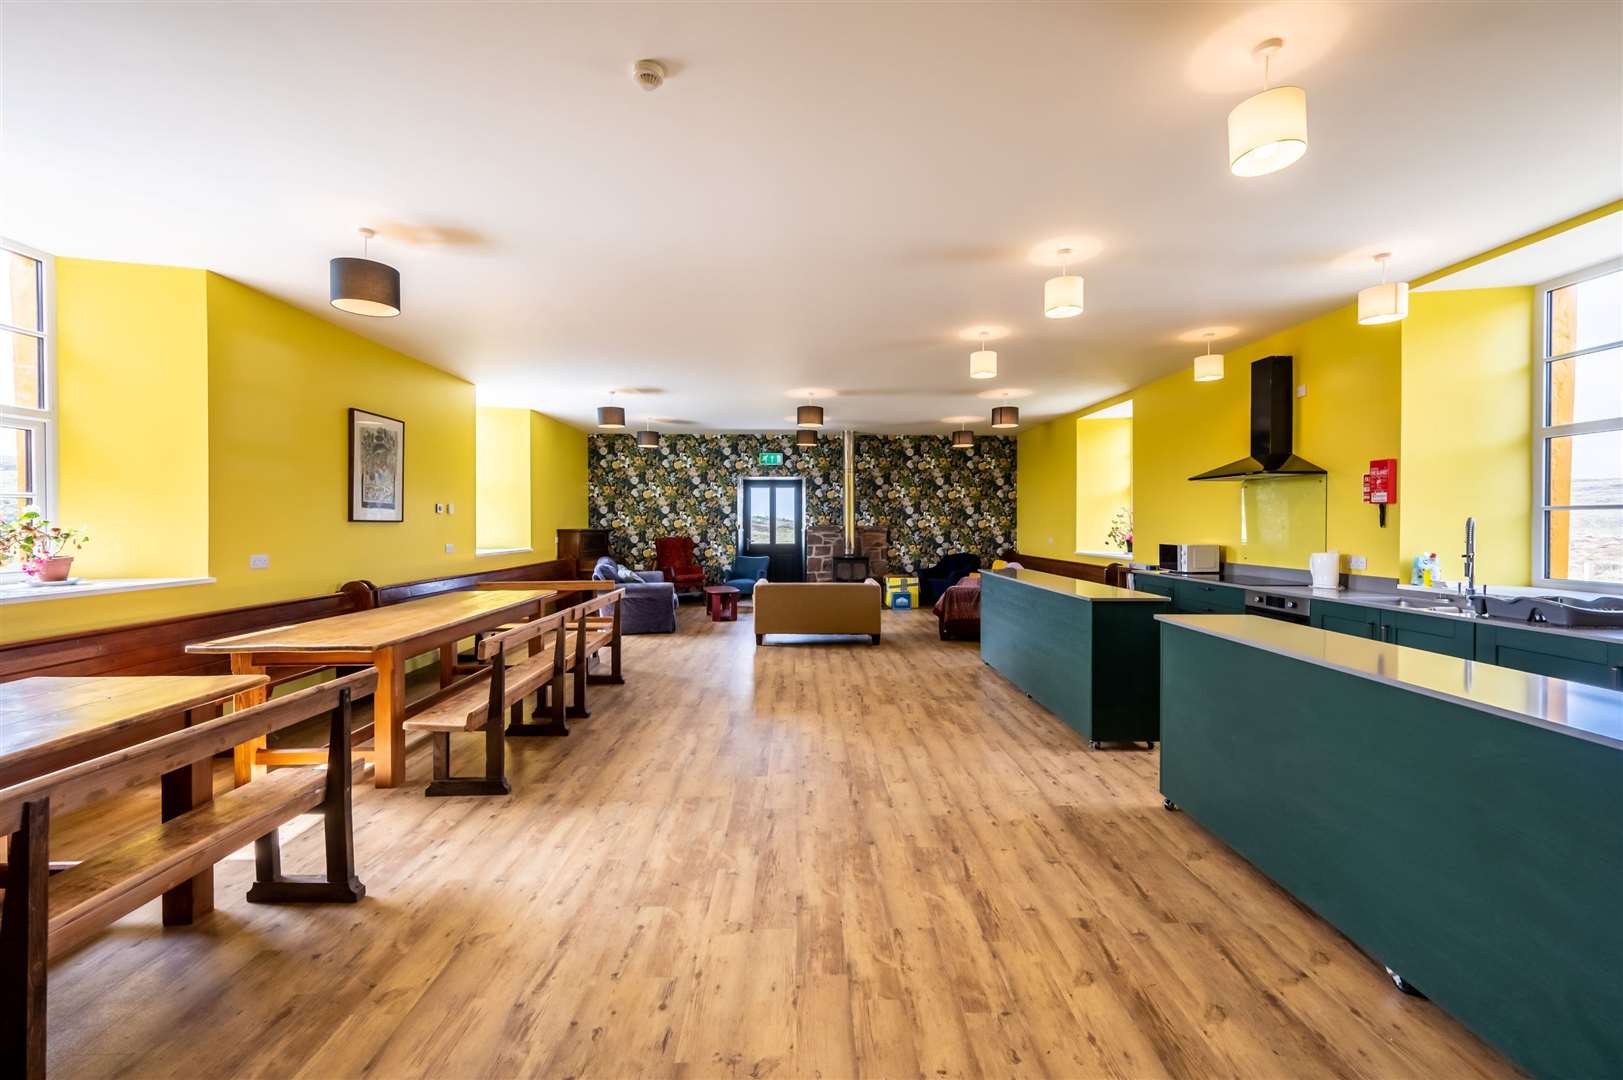 The modern, energy-efficient accommodation can accommodate up to 22 guests in total, including a self-contained studio flat which is perfectly suited for use as a manager’s accommodation if required.